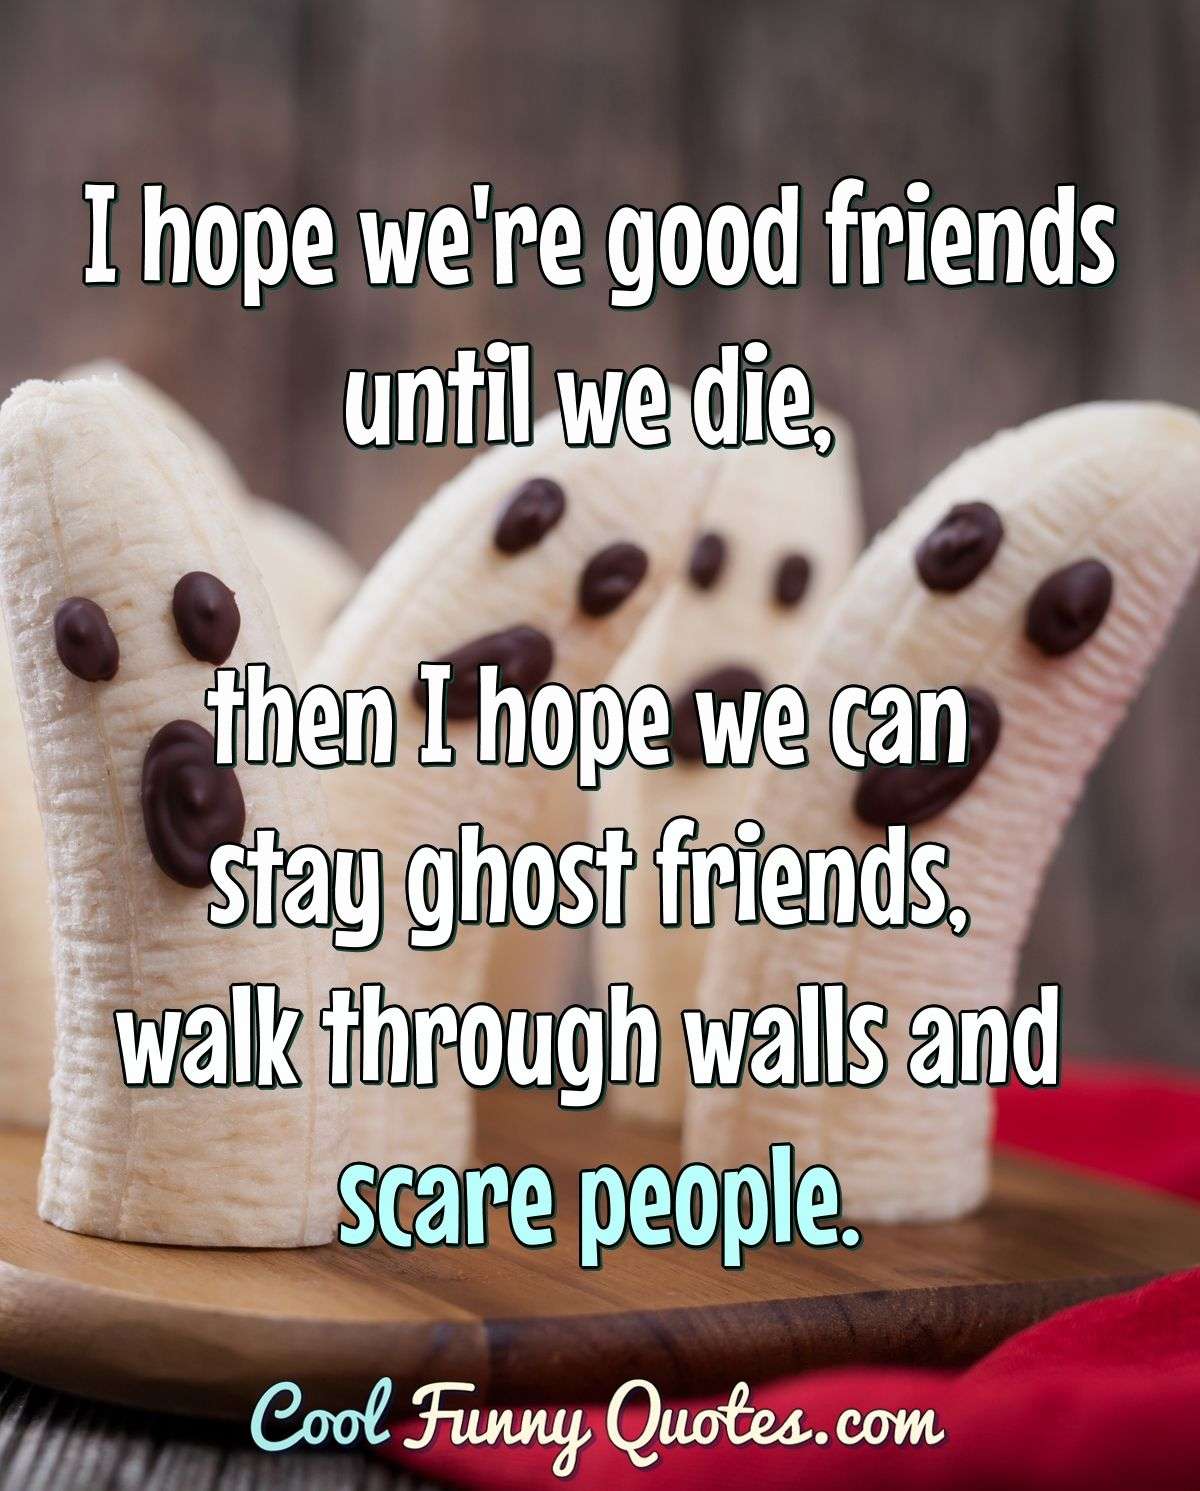 I hope we're good friends until we die, then I hope we can stay ghost friends, walk through walls and scare people. - Anonymous